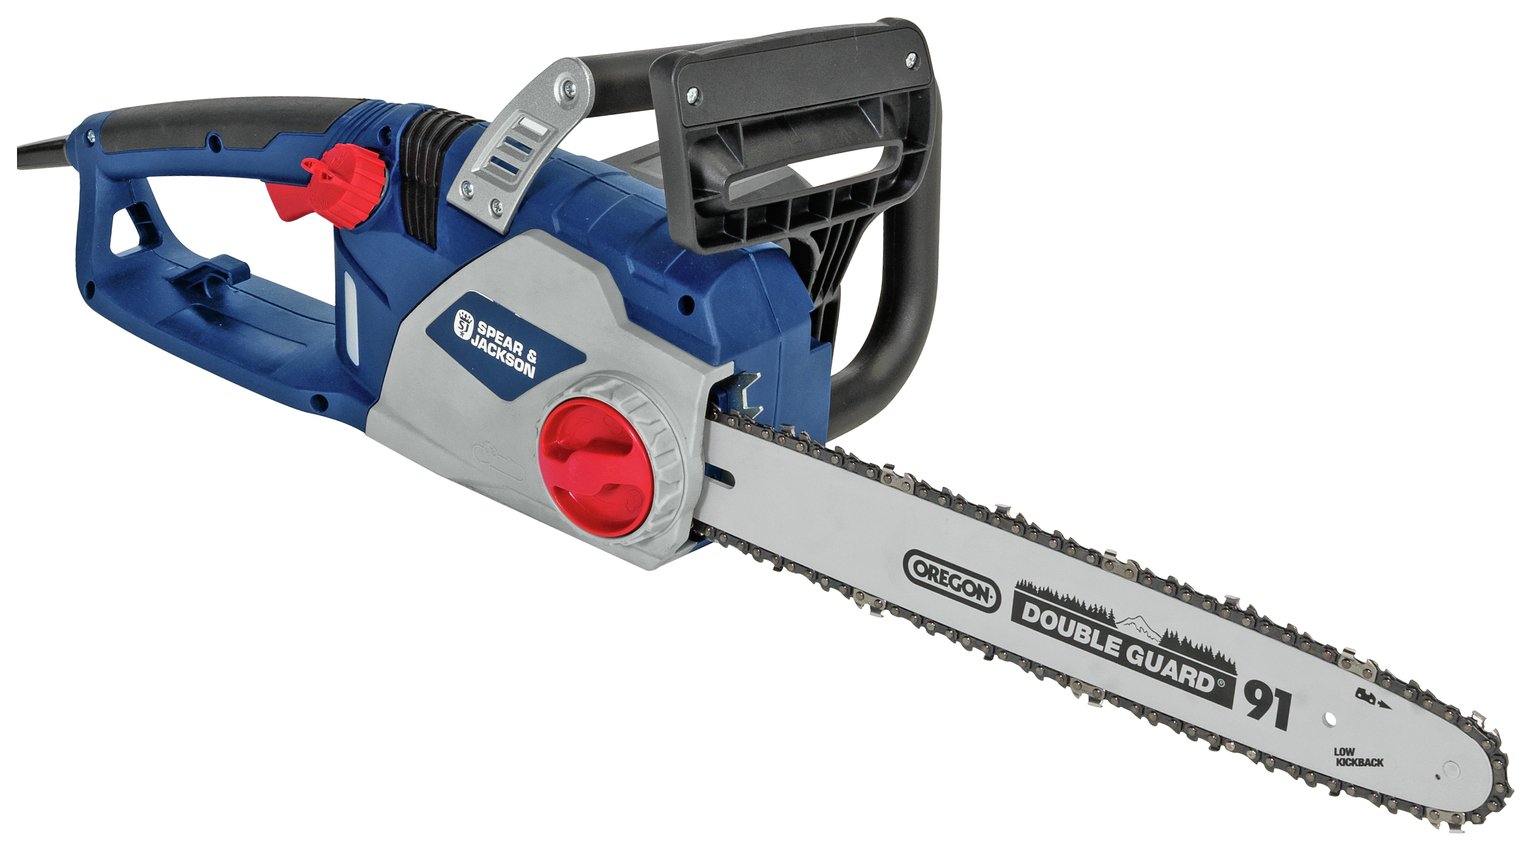 Spear & Jackson S2040EC2 40cm Electric Chainsaw review